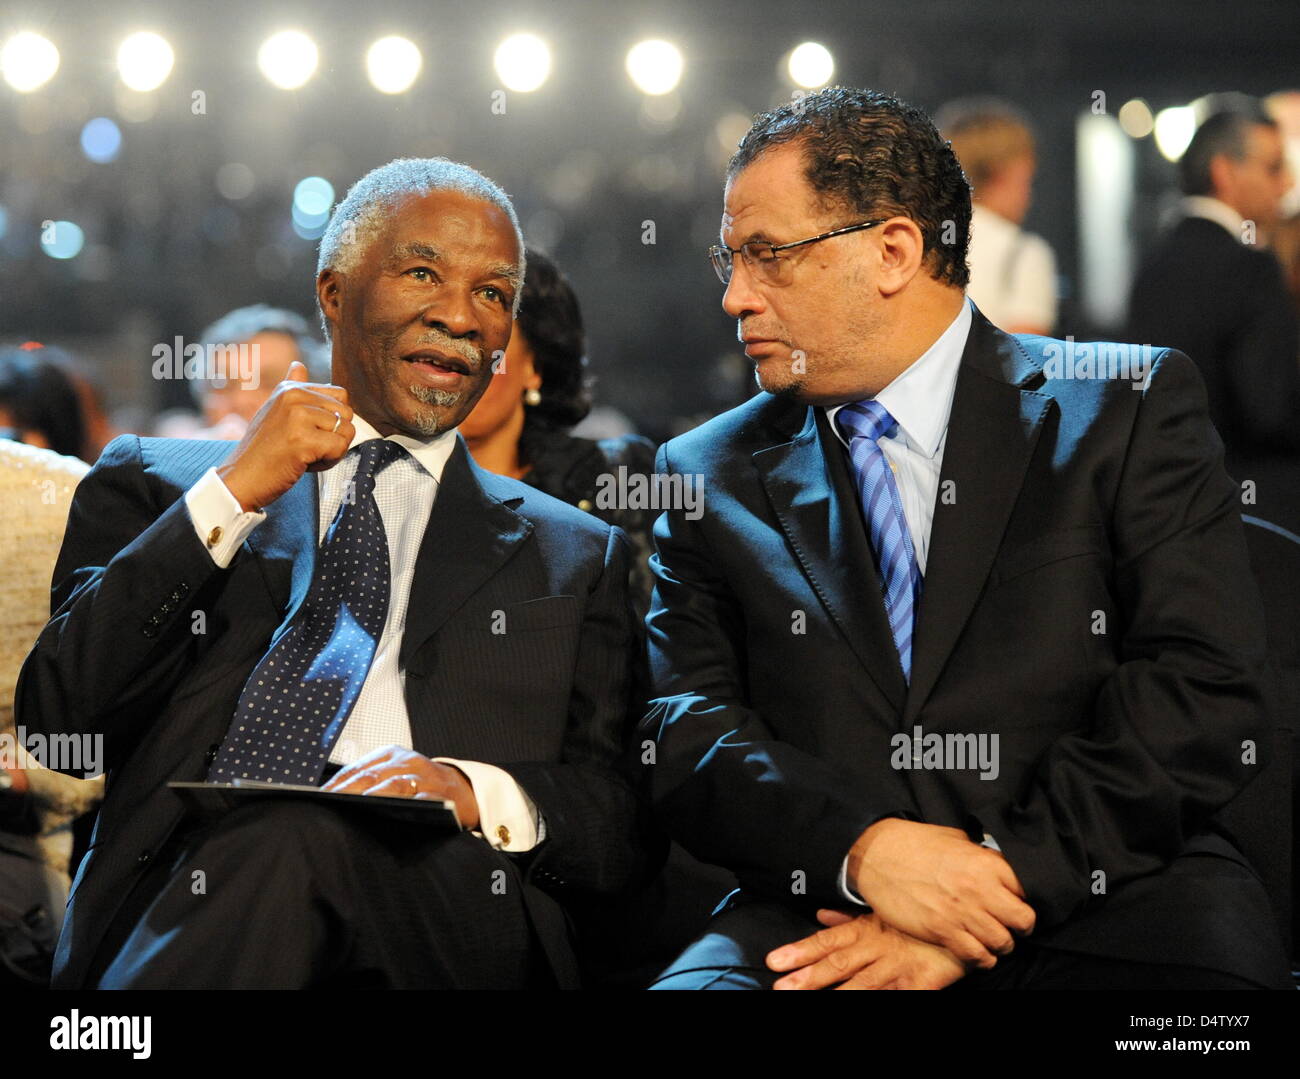 South African former president Thabo Mbeki (L) and managing director of FIFA World Cup 2010 organisation committee Danny Jordaan (R) during the draw of FIFA 2010 World Cup groups in Cape Town, Germany, 04 December 2009. Photo: BERND WEISSBROD Stock Photo